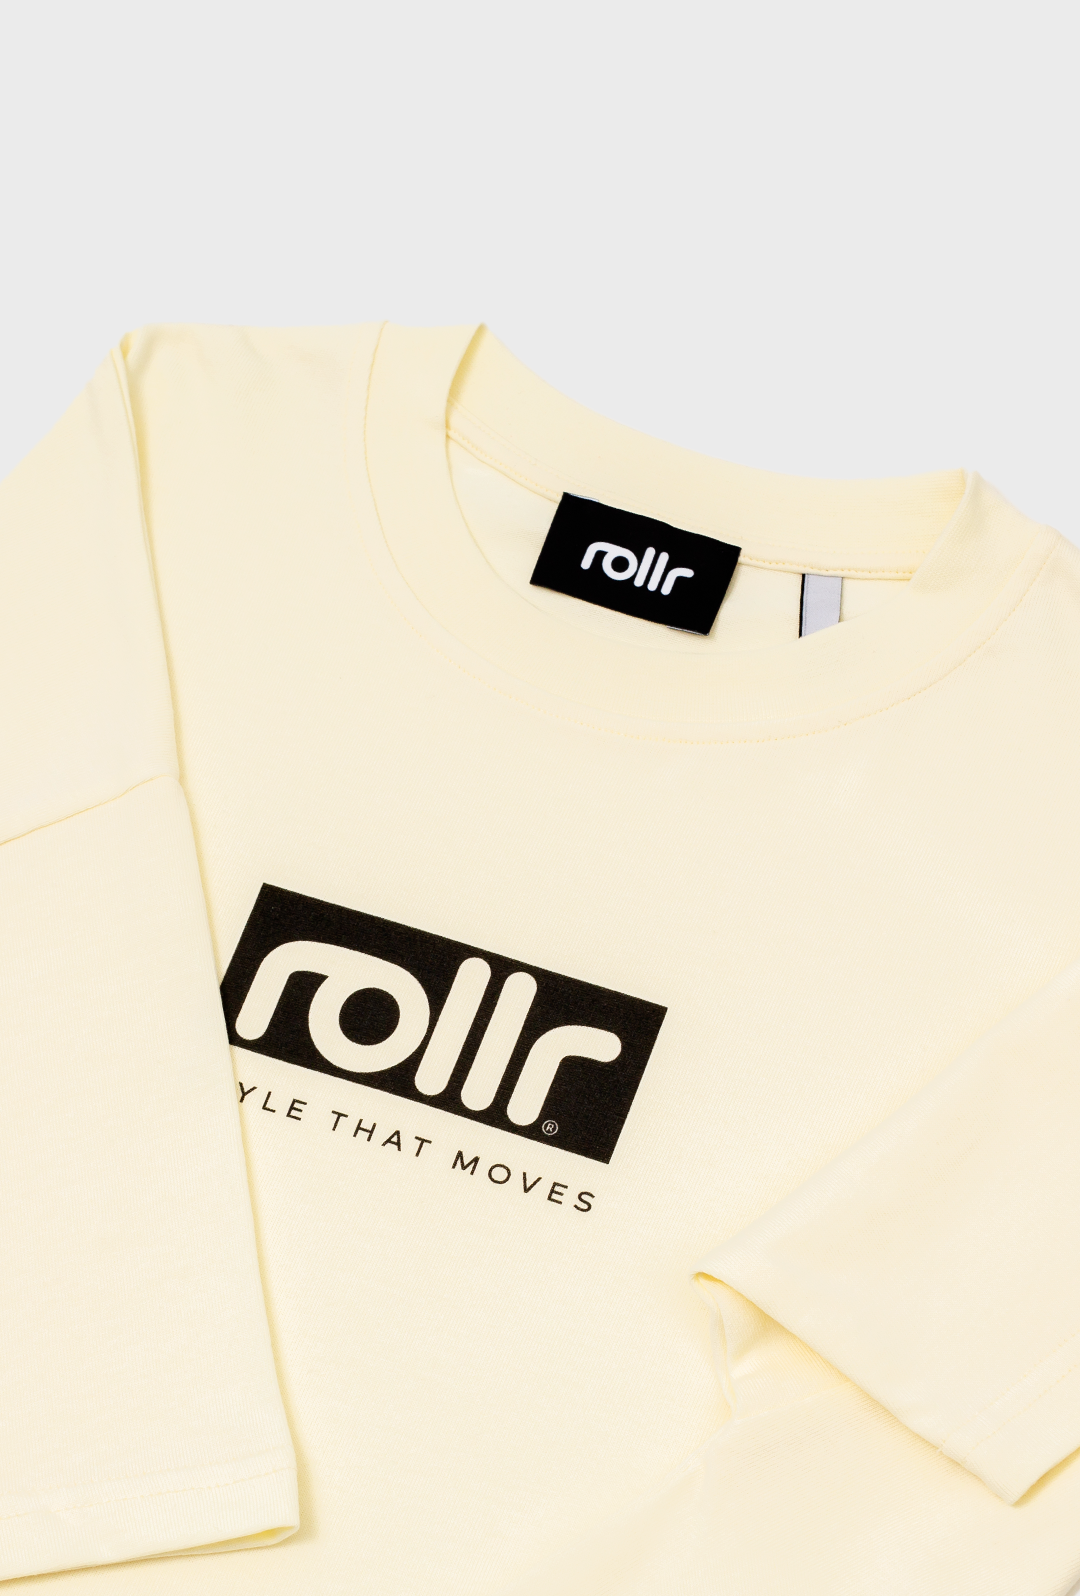 rollr clothing vanilla cream cropped tee by roller clothing, with rollr logo and style that moves printed tagline